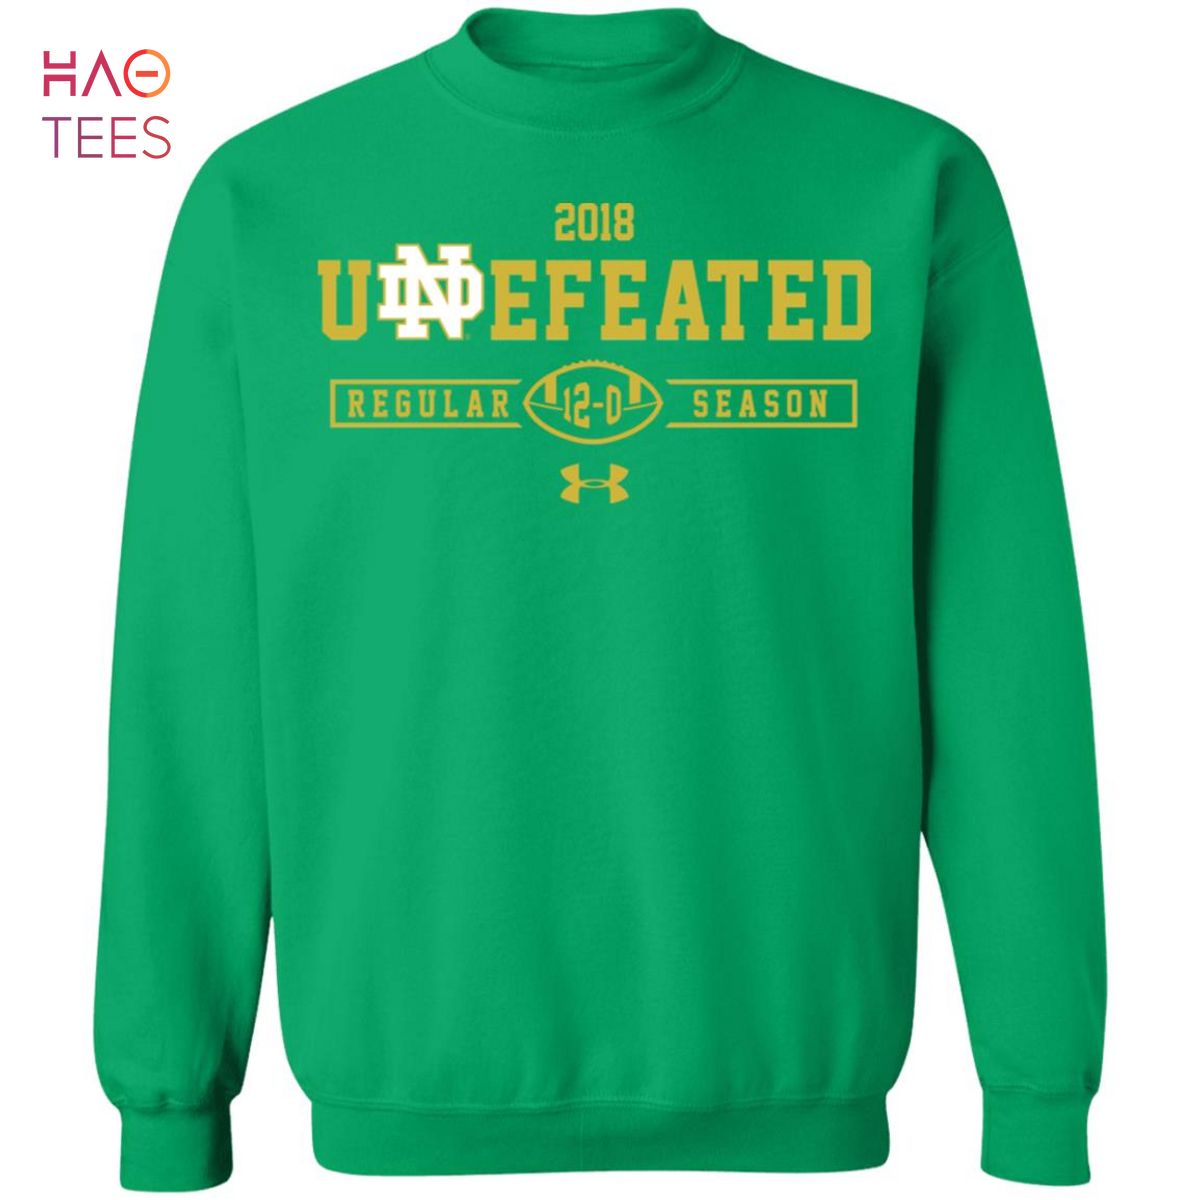 [NEW] Notre Dame Undefeated Sweater